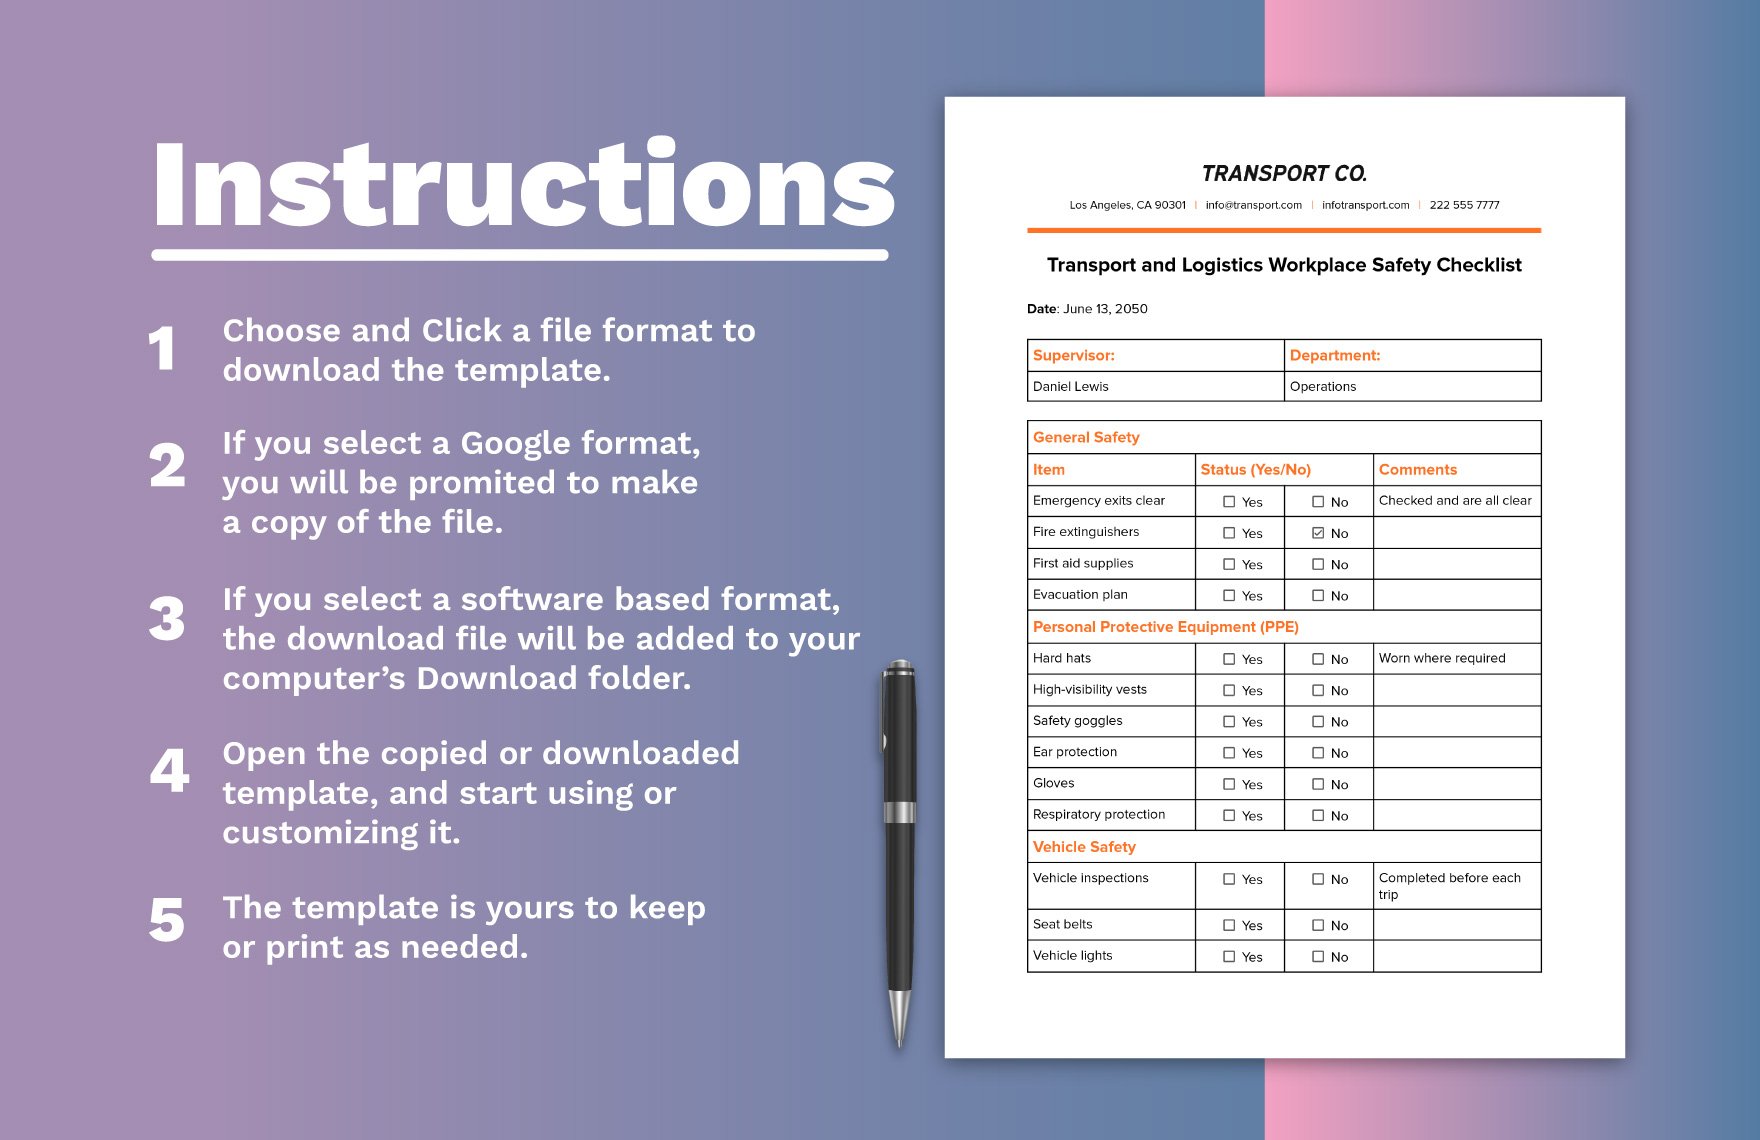 Transport and Logistics Workplace Safety Checklist Template